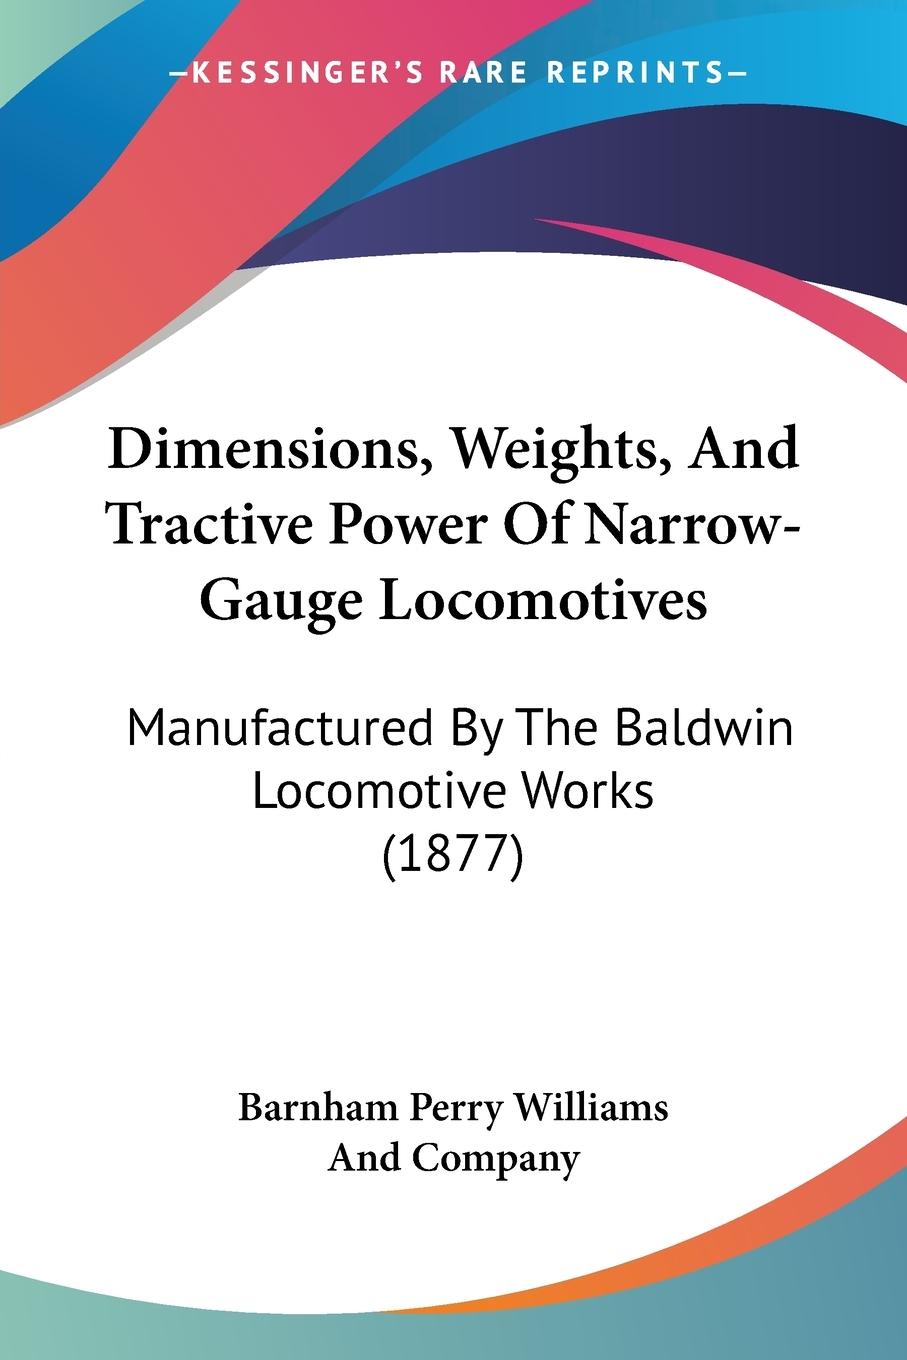 Dimensions, Weights, And Tractive Power Of Narrow-Gauge Locomotives - Barnham Perry Williams And Company